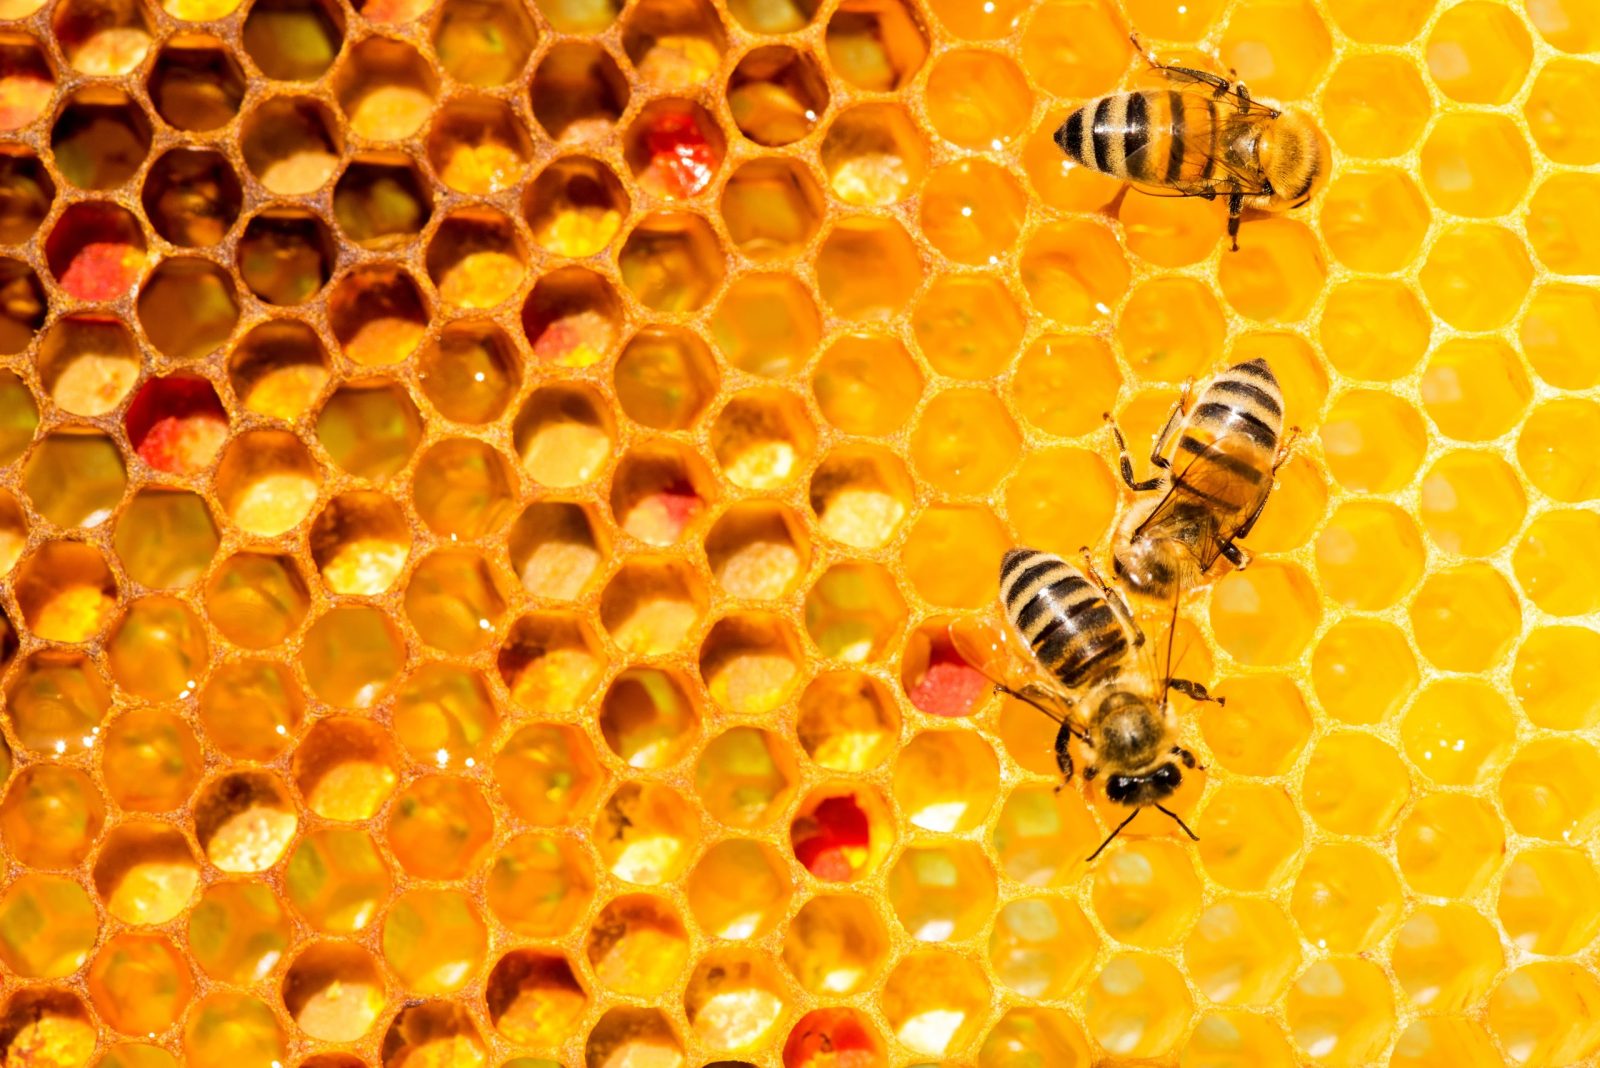 Bees on a honey comb